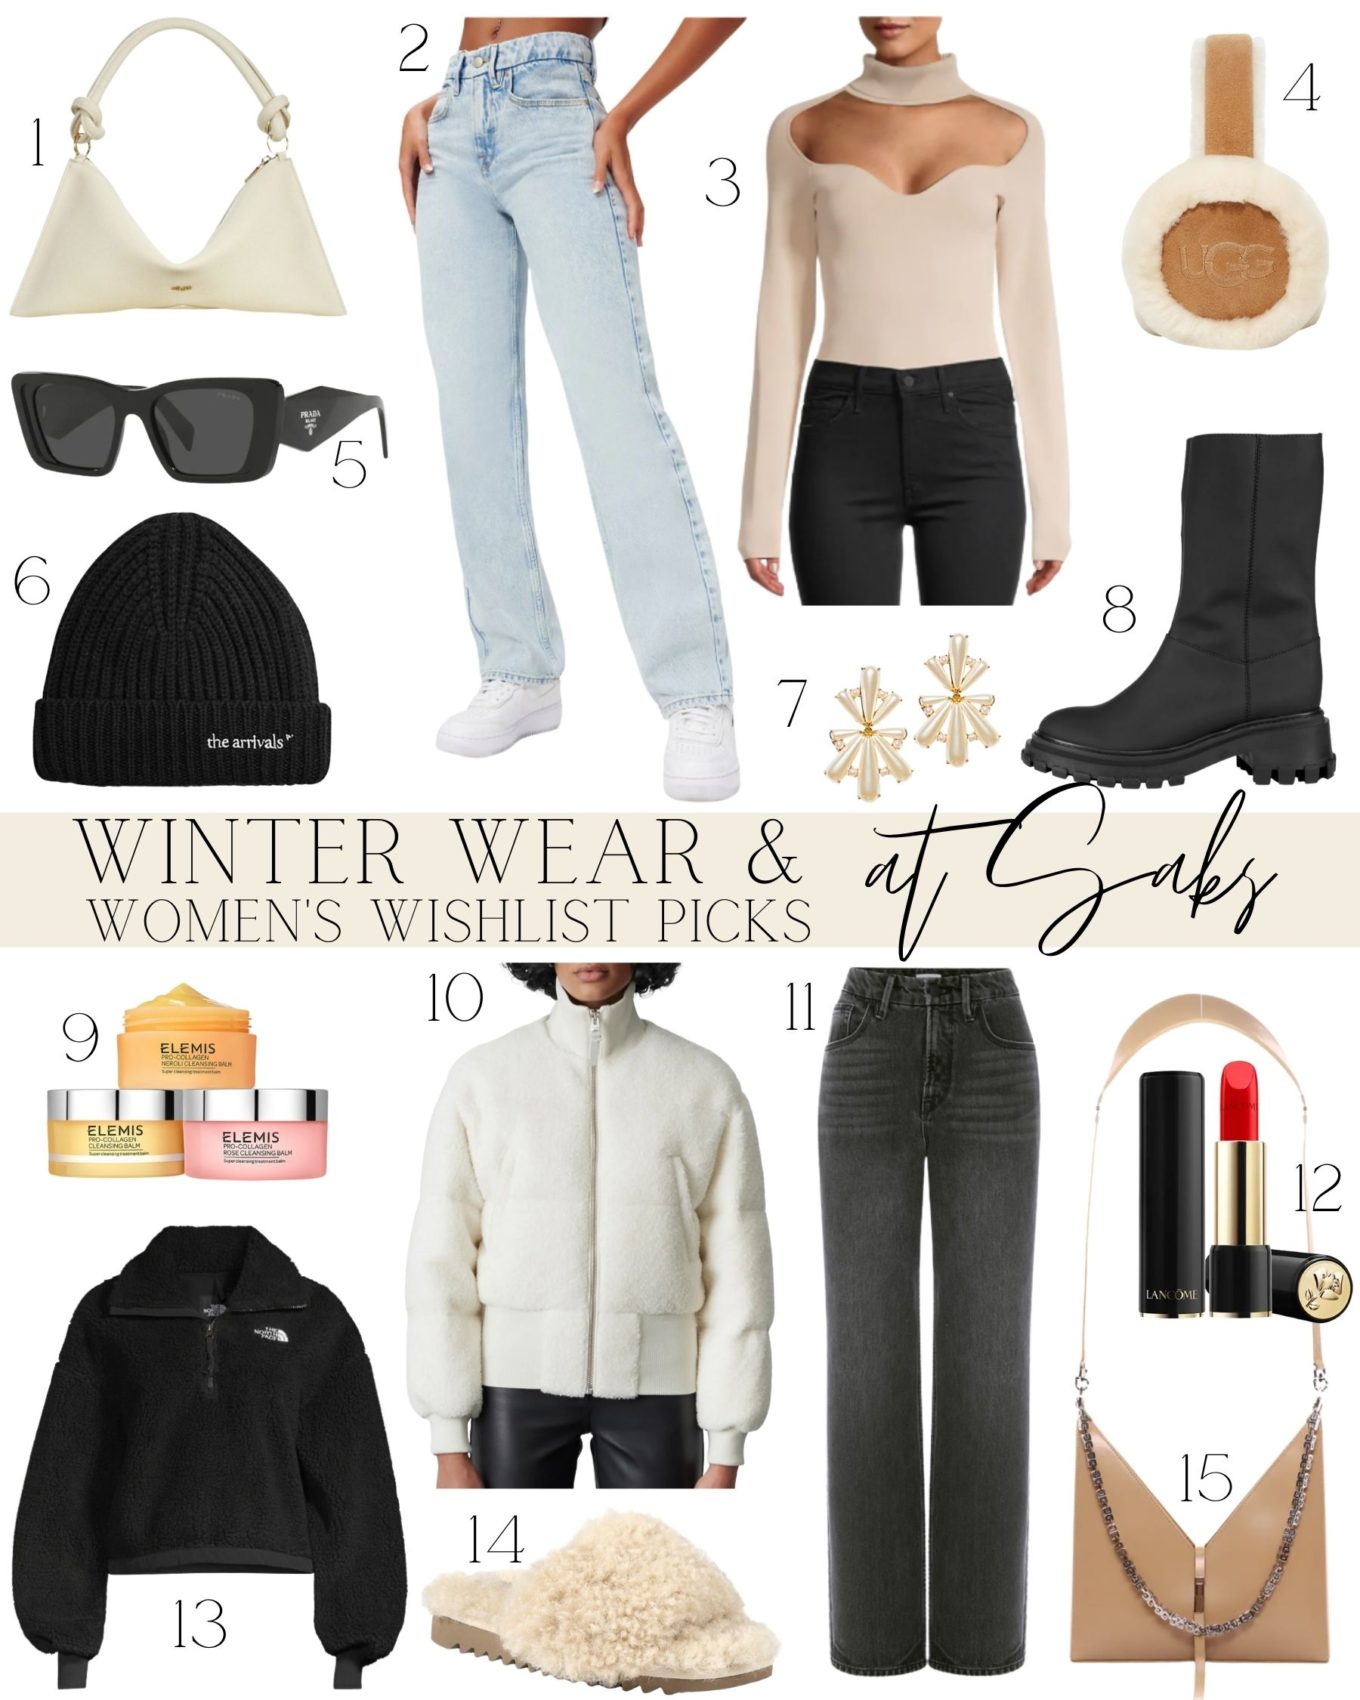 sweaters and winter style